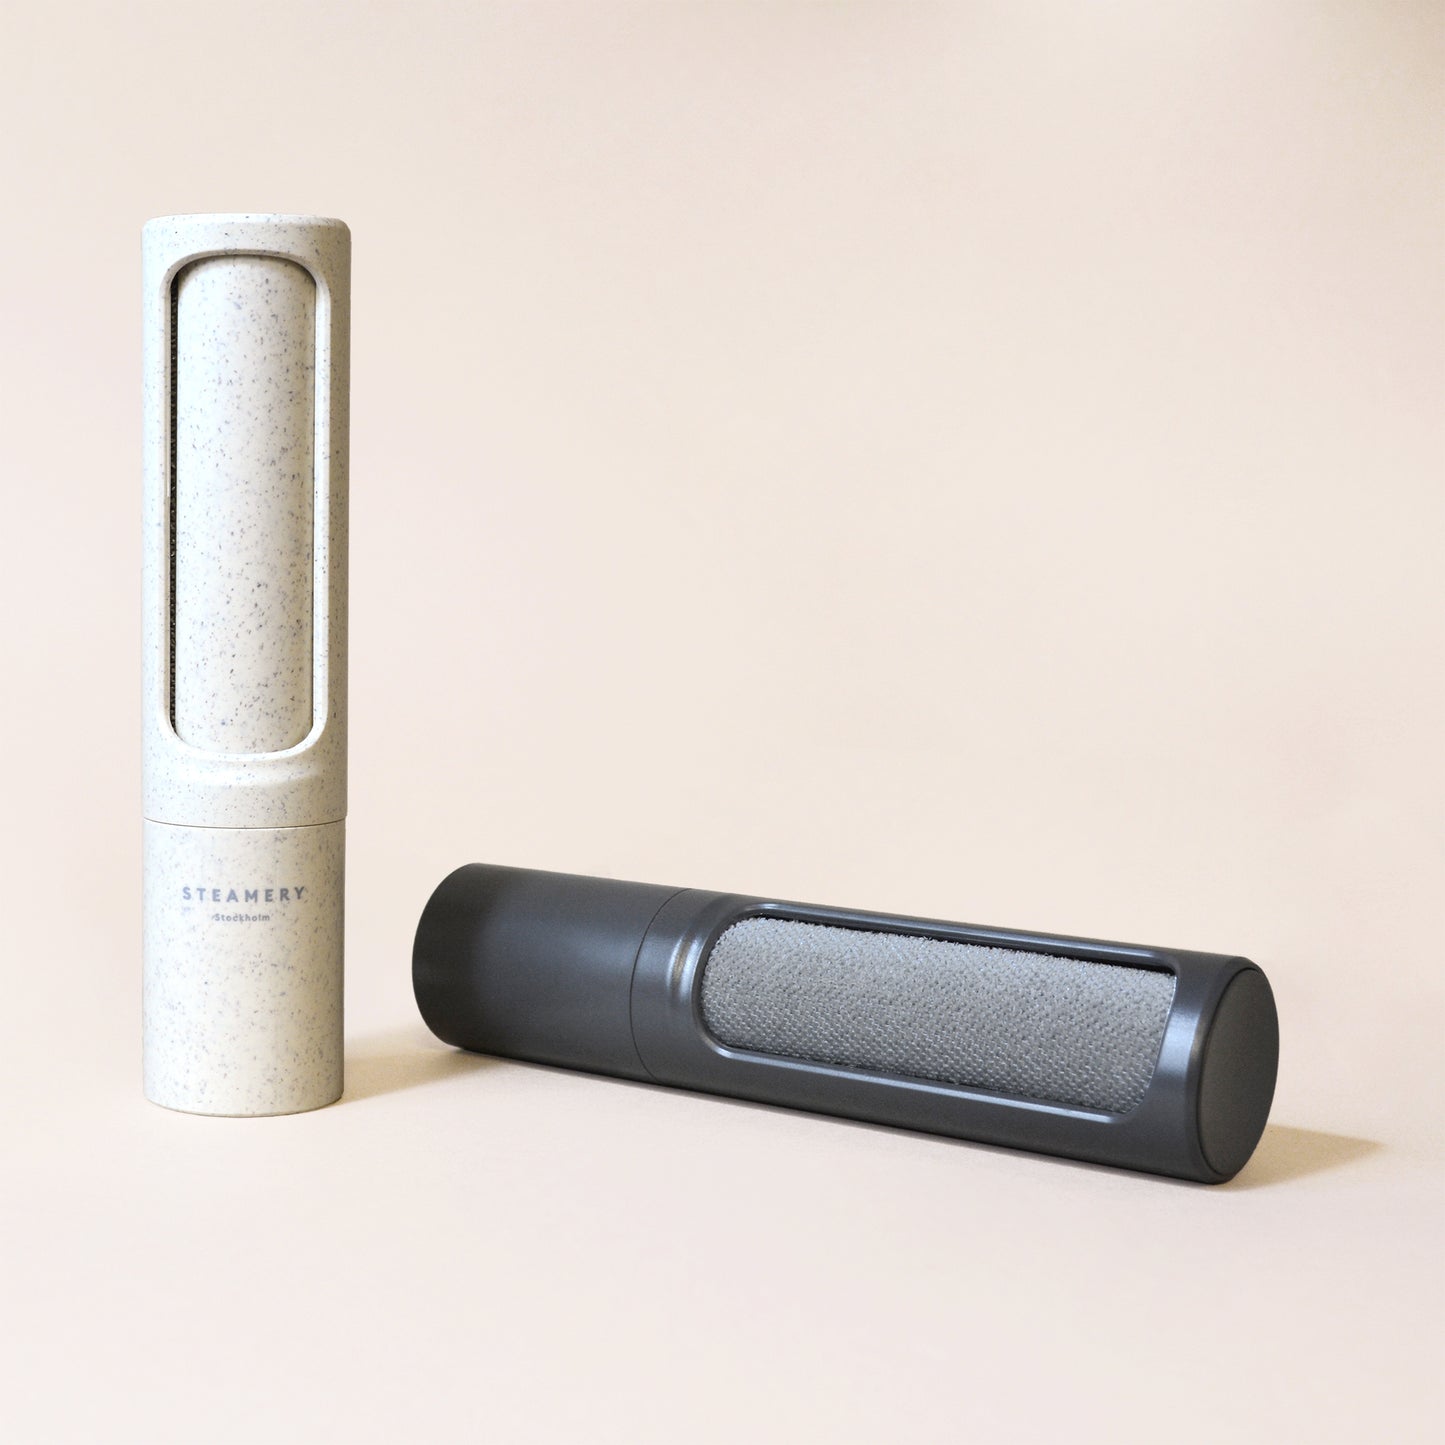 A self-standing speckled beige reusable lint roller next to a charcoal reusable lint roller with grey angled polyester bristles visible; both are on a beige backdrop